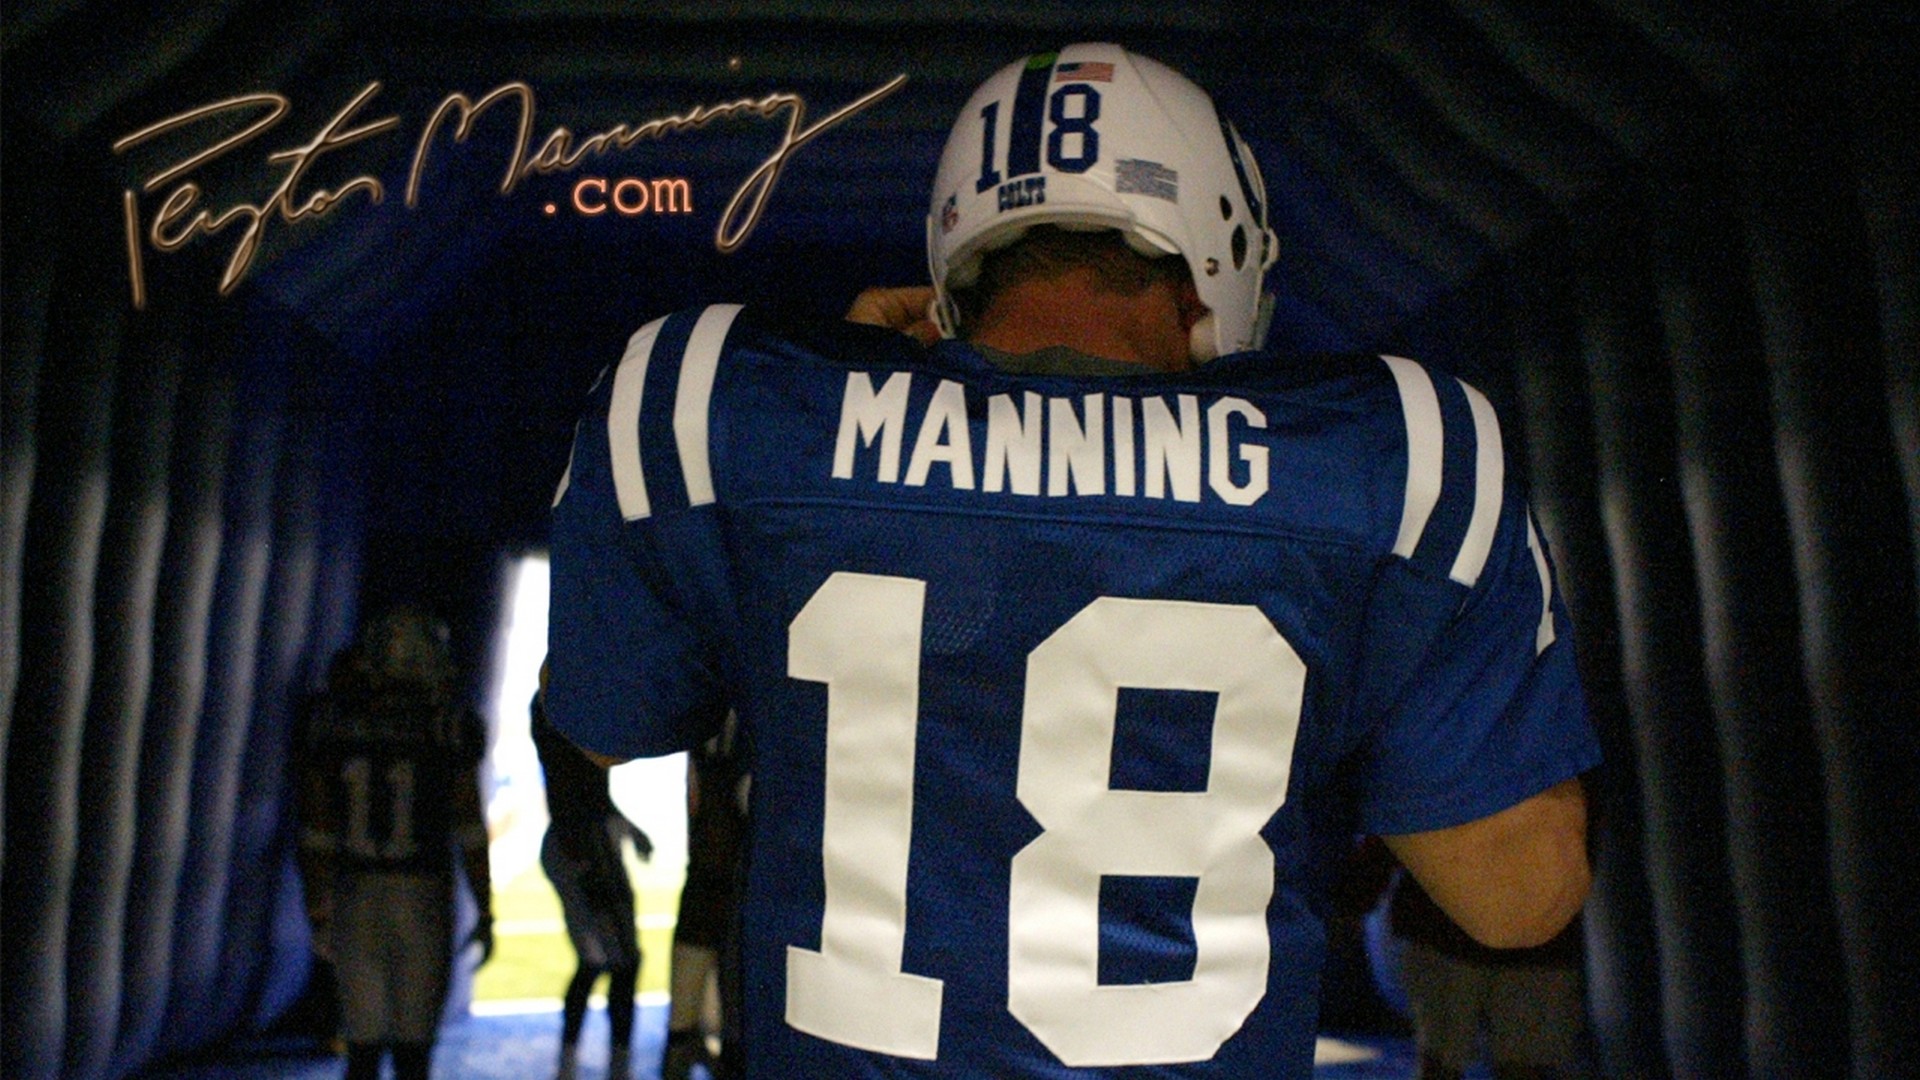 Wallpapers Peyton Manning Indianapolis Colts with high-resolution 1920x1080 pixel. You can use this wallpaper for your Mac or Windows Desktop Background, iPhone, Android or Tablet and another Smartphone device